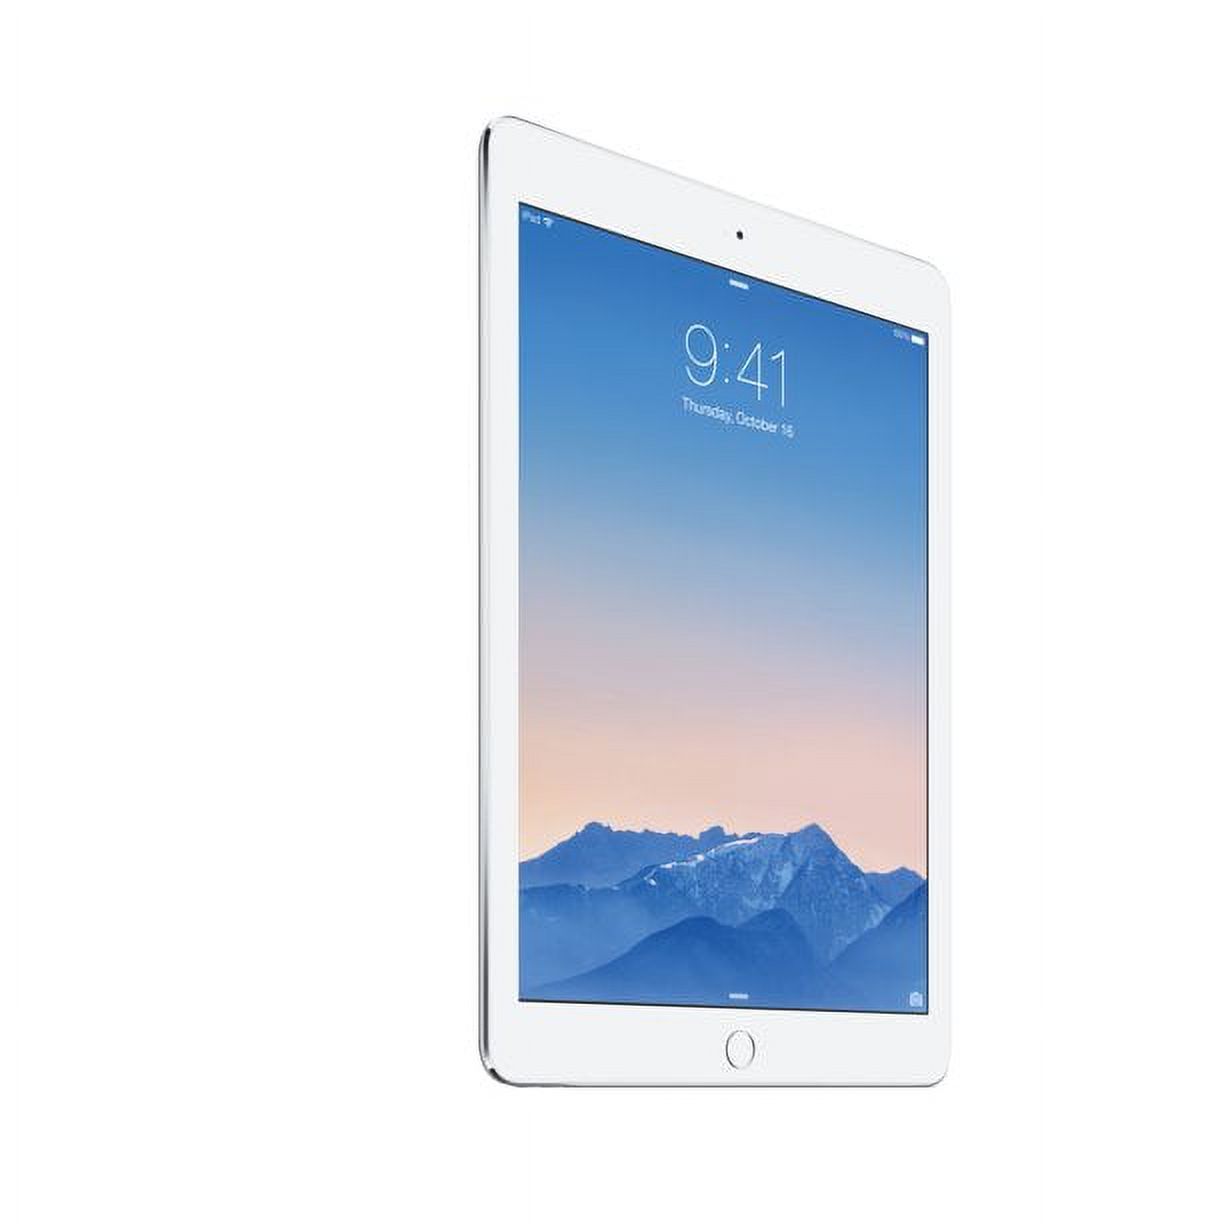 Restored Apple iPad Air 2 WiFi Only 16GB - Silver (Refurbished) - image 4 of 4